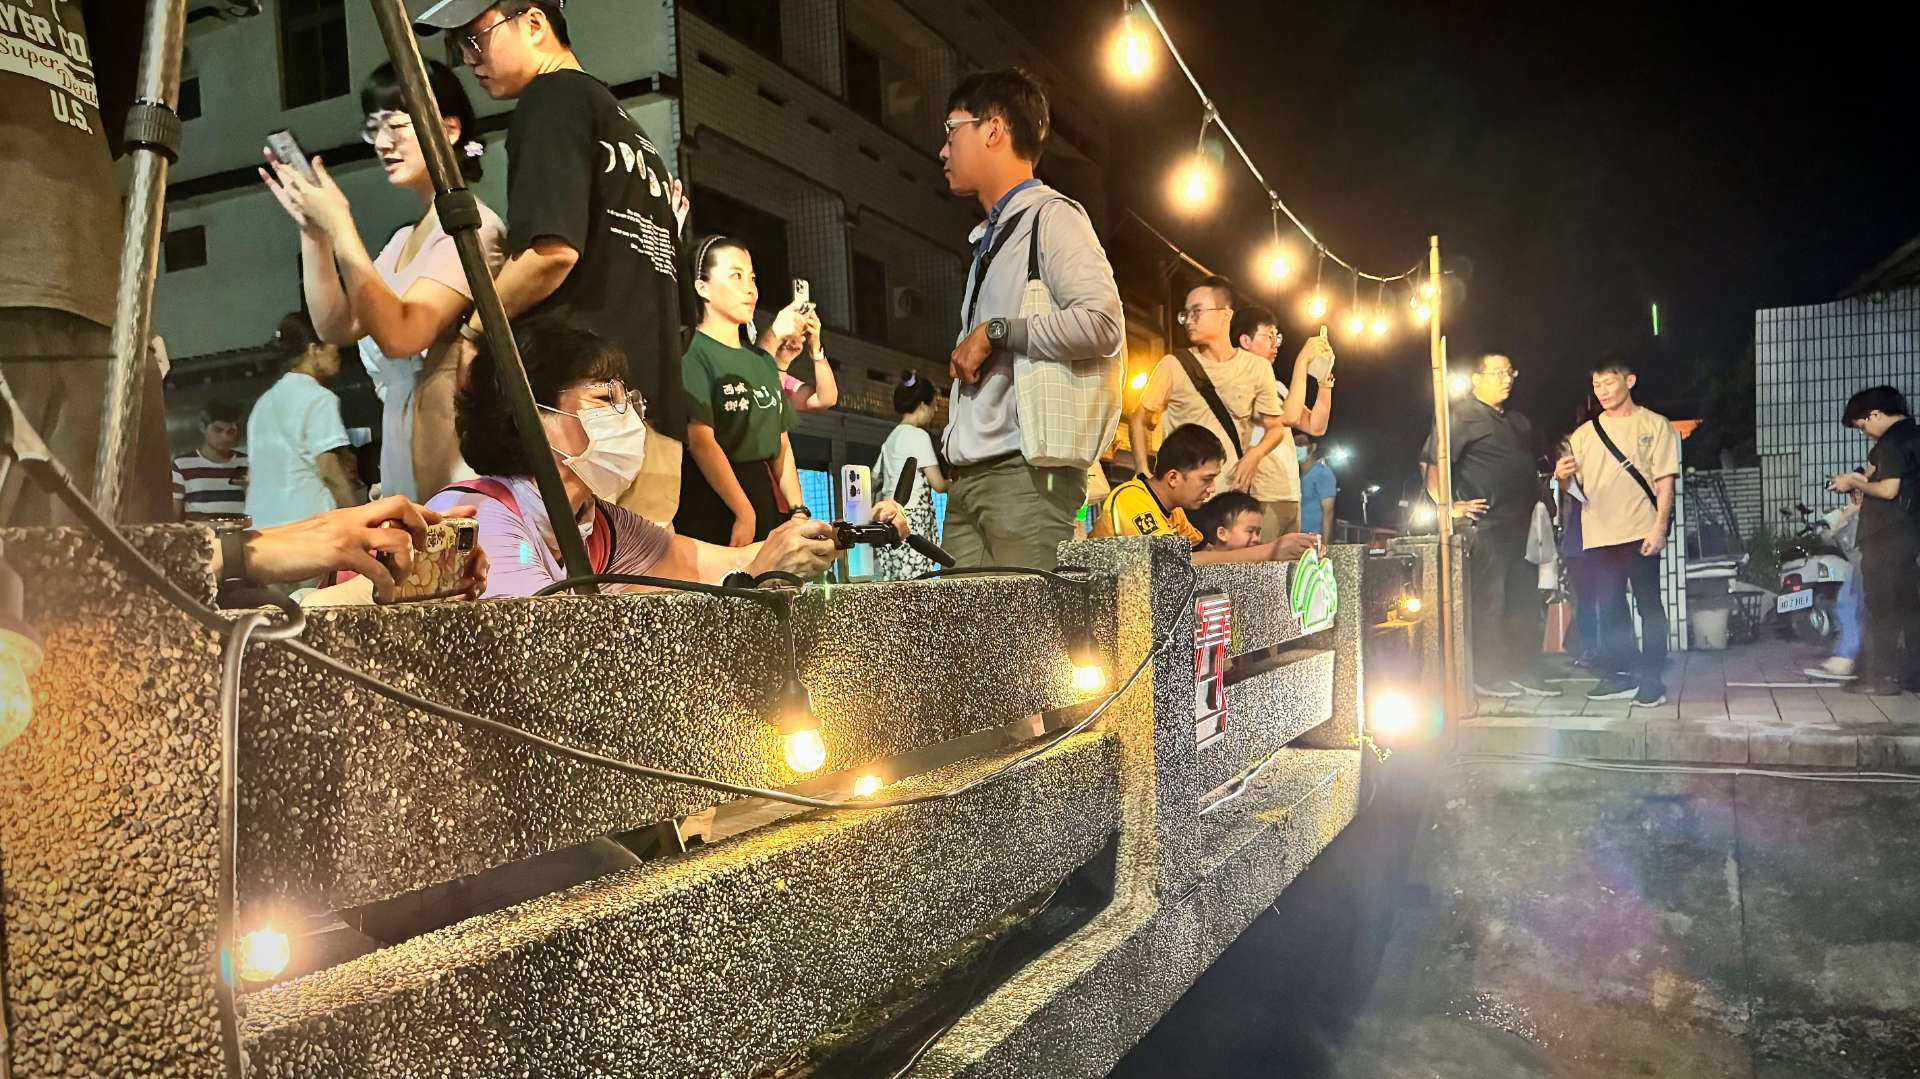 A crowd of people taking nighttime photos on a small concrete bridge, lit by festoon lights.